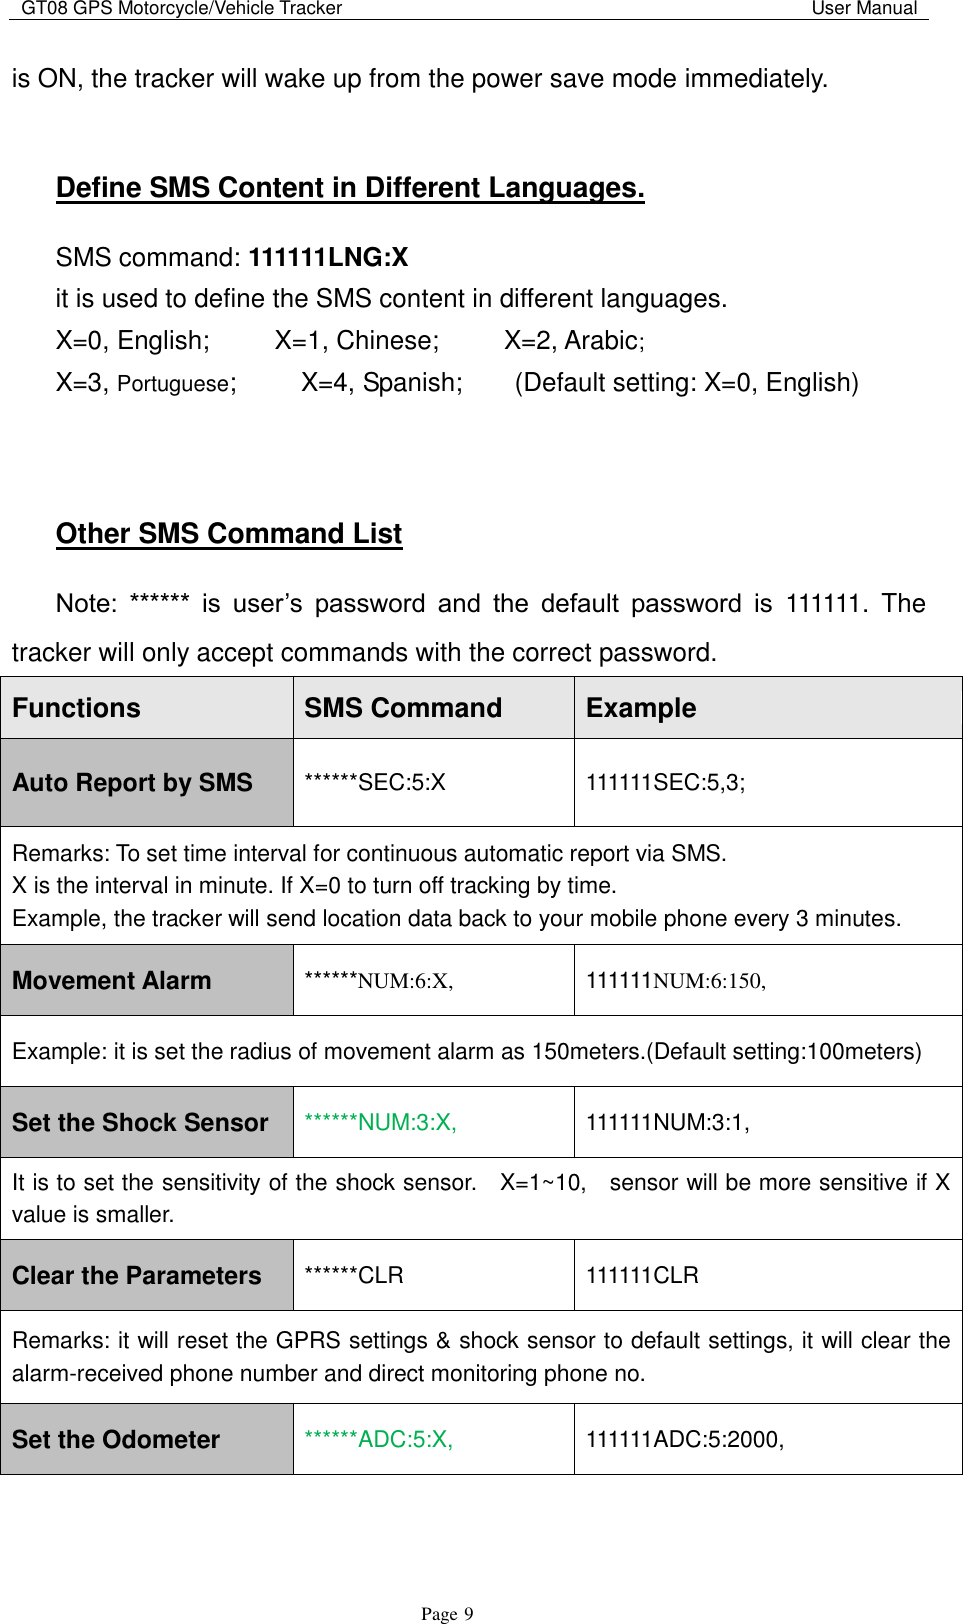 GT08 GPS Motorcycle/Vehicle Tracker                                                                                           User Manual                                     Page   9 is ON, the tracker will wake up from the power save mode immediately.  Define SMS Content in Different Languages. SMS command: 111111LNG:X it is used to define the SMS content in different languages.   X=0, English;          X=1, Chinese;          X=2, Arabic; X=3, Portuguese;          X=4, Spanish;        (Default setting: X=0, English)   Other SMS Command List Note:  ******  is  user‟s  password  and  the  default  password  is  111111.  The tracker will only accept commands with the correct password. Functions SMS Command Example Auto Report by SMS ******SEC:5:X 111111SEC:5,3; Remarks: To set time interval for continuous automatic report via SMS.   X is the interval in minute. If X=0 to turn off tracking by time.   Example, the tracker will send location data back to your mobile phone every 3 minutes. Movement Alarm ******NUM:6:X, 111111NUM:6:150, Example: it is set the radius of movement alarm as 150meters.(Default setting:100meters) Set the Shock Sensor ******NUM:3:X, 111111NUM:3:1, It is to set the sensitivity of the shock sensor.    X=1~10,    sensor will be more sensitive if X value is smaller. Clear the Parameters ******CLR 111111CLR Remarks: it will reset the GPRS settings &amp; shock sensor to default settings, it will clear the alarm-received phone number and direct monitoring phone no. Set the Odometer ******ADC:5:X, 111111ADC:5:2000, 